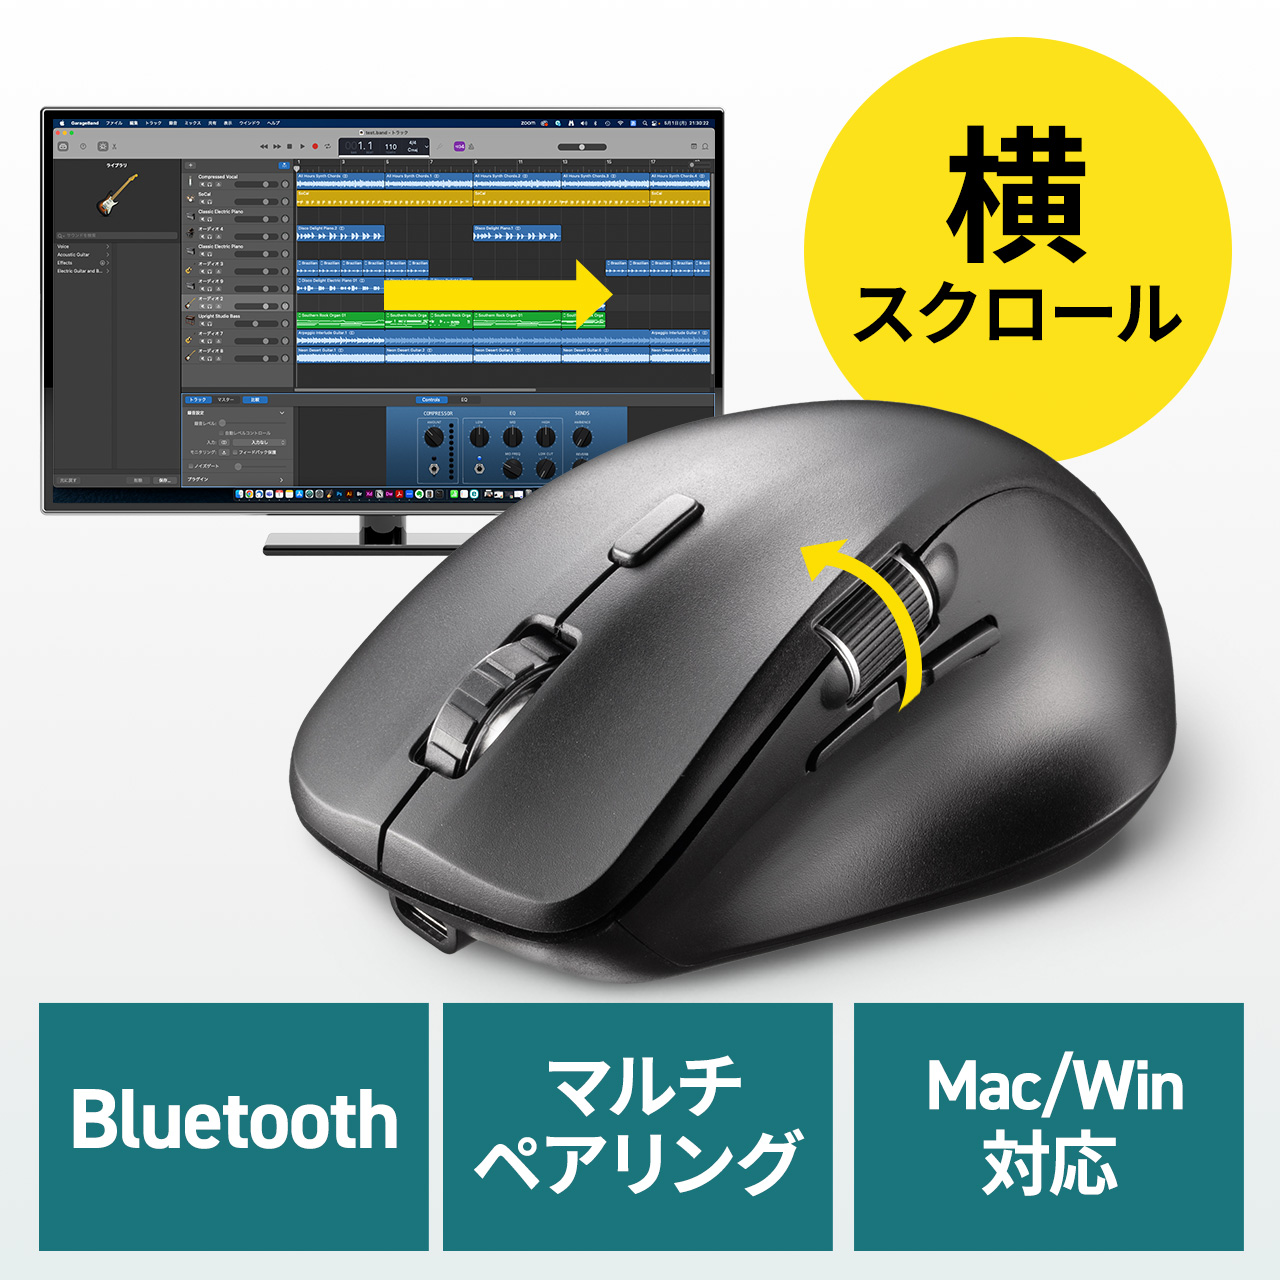  width scroll mouse wireless Bluetooth connection side scroll mouse multi pairing blue LED 3 -step count switch rechargeable EZ4-MABT191